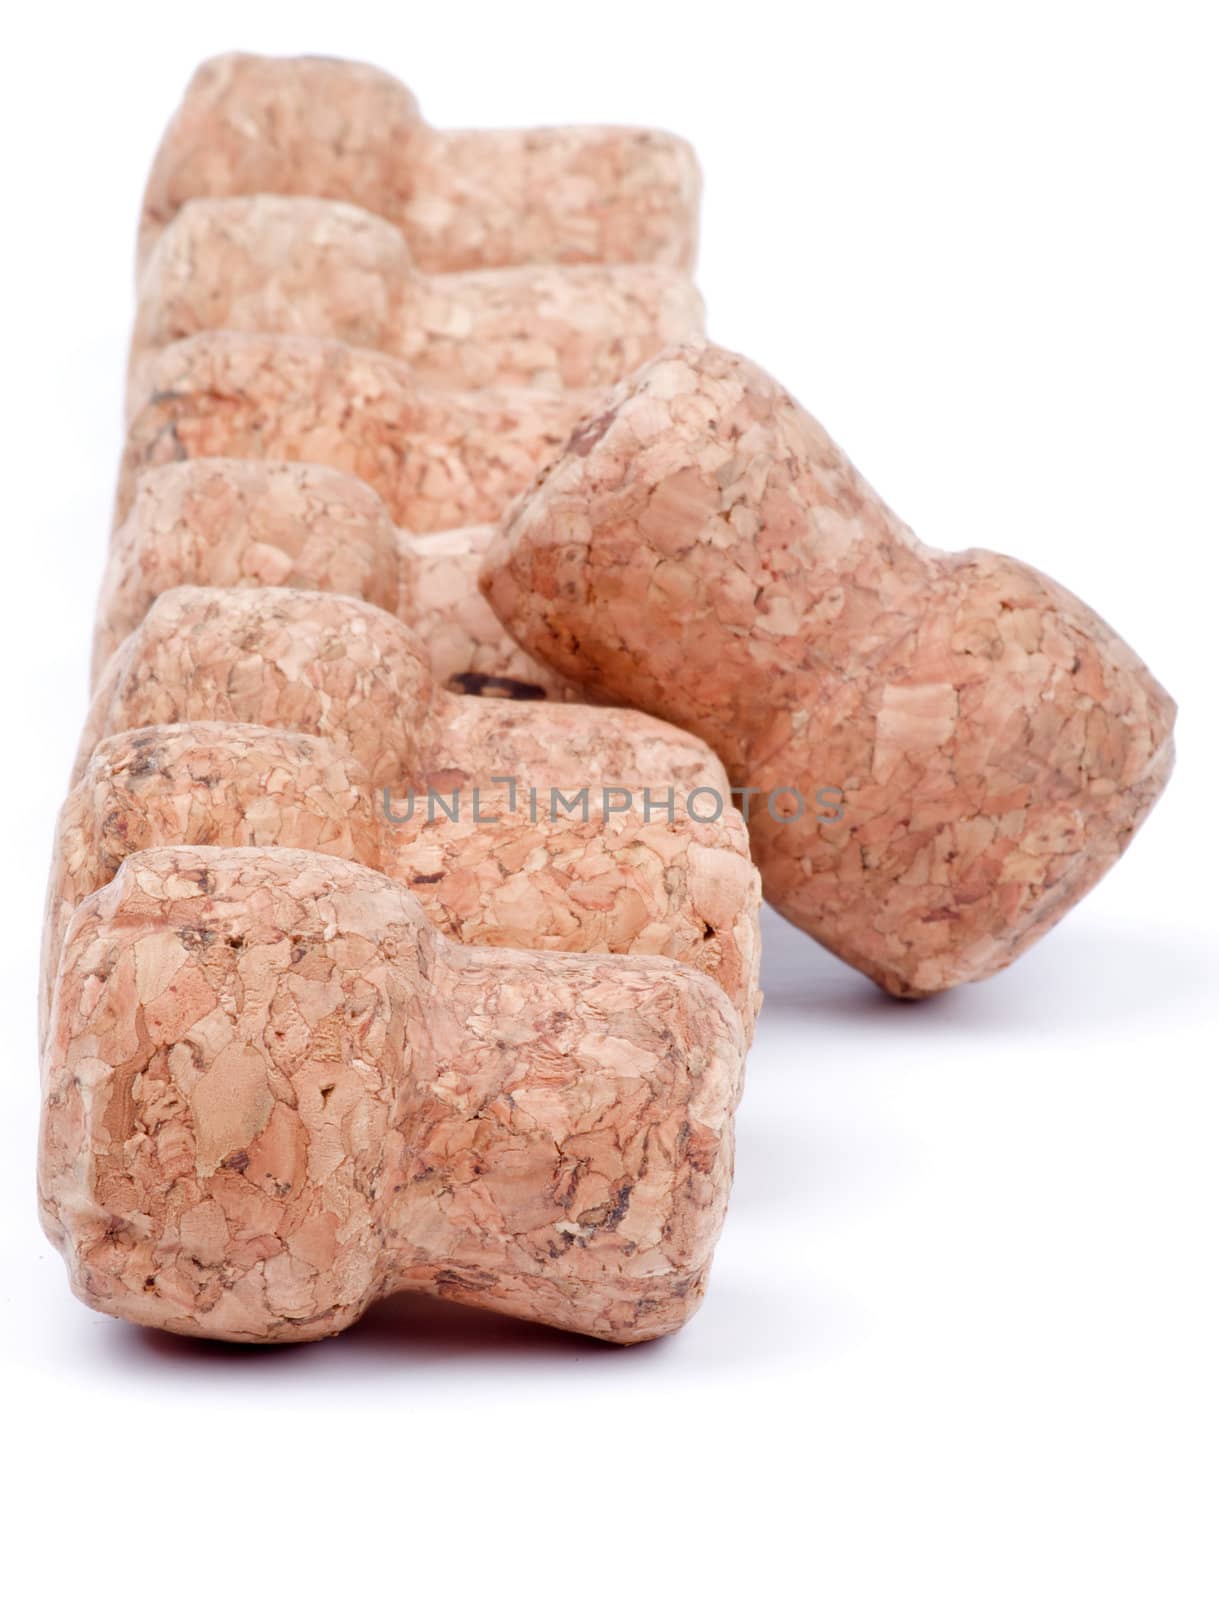 Cortical Champagne Corks in a Row isolated on white background